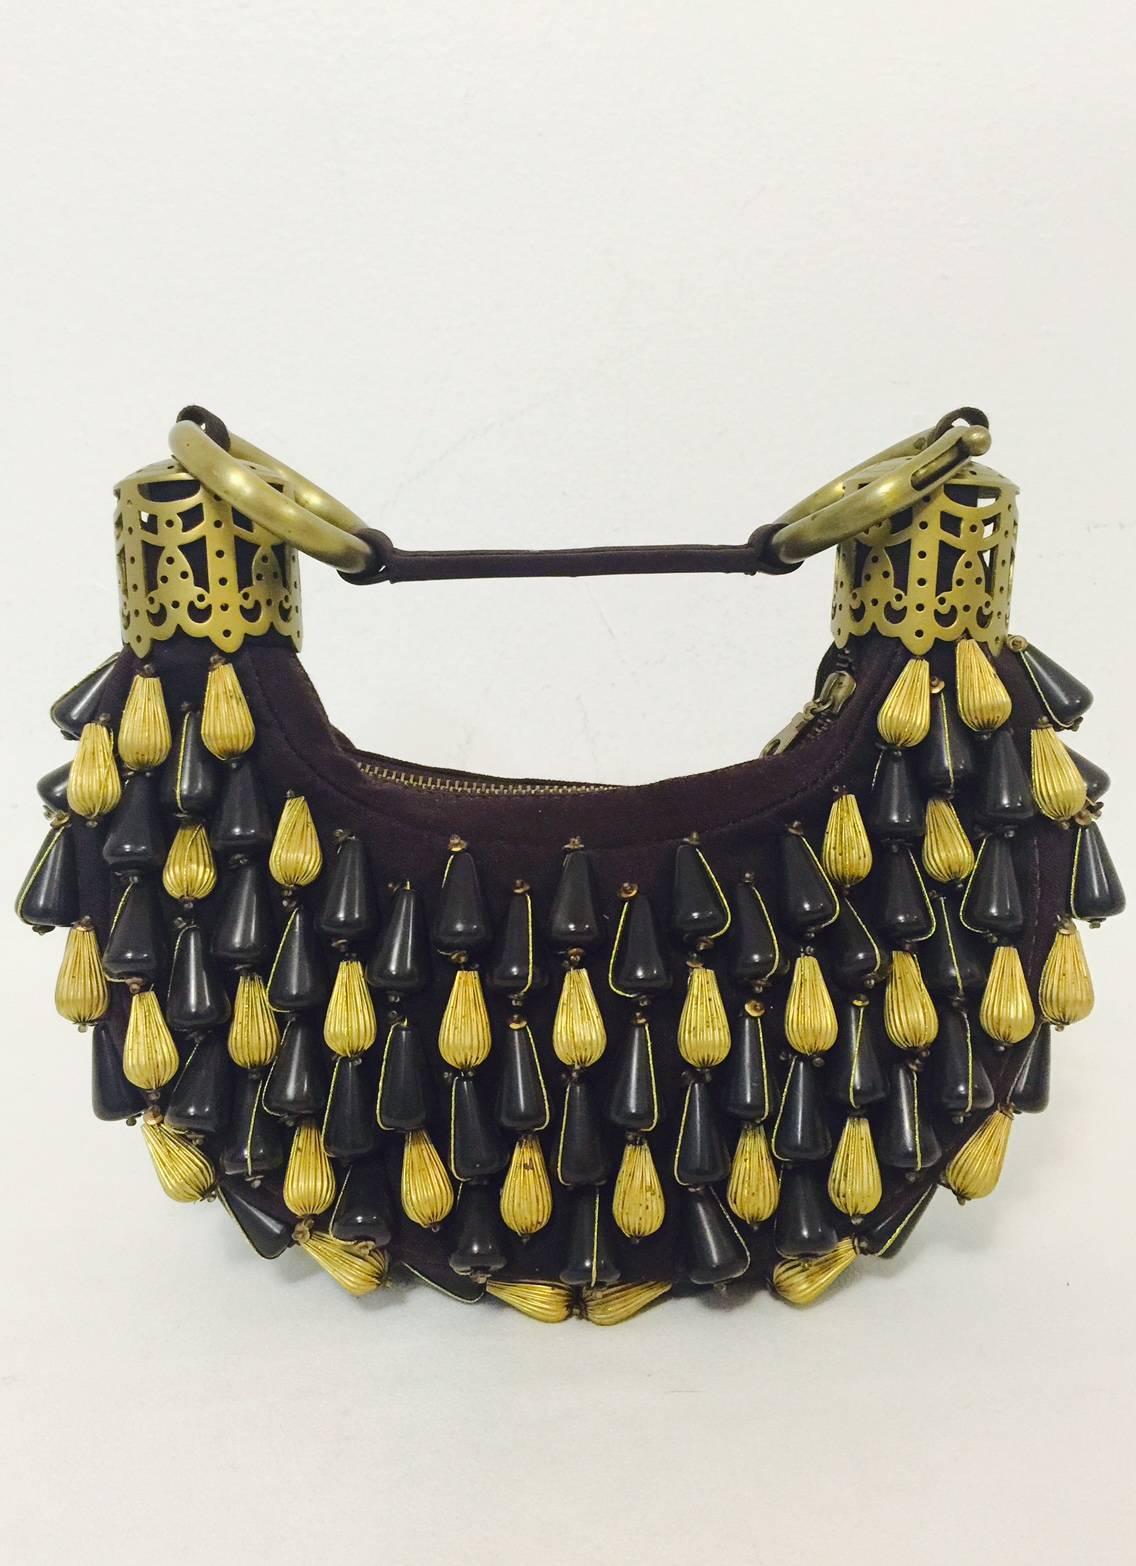 Black Chloe Handcrafted Chocolate Canvas Beaded Bracelet Bag With Gold Tone Hardware